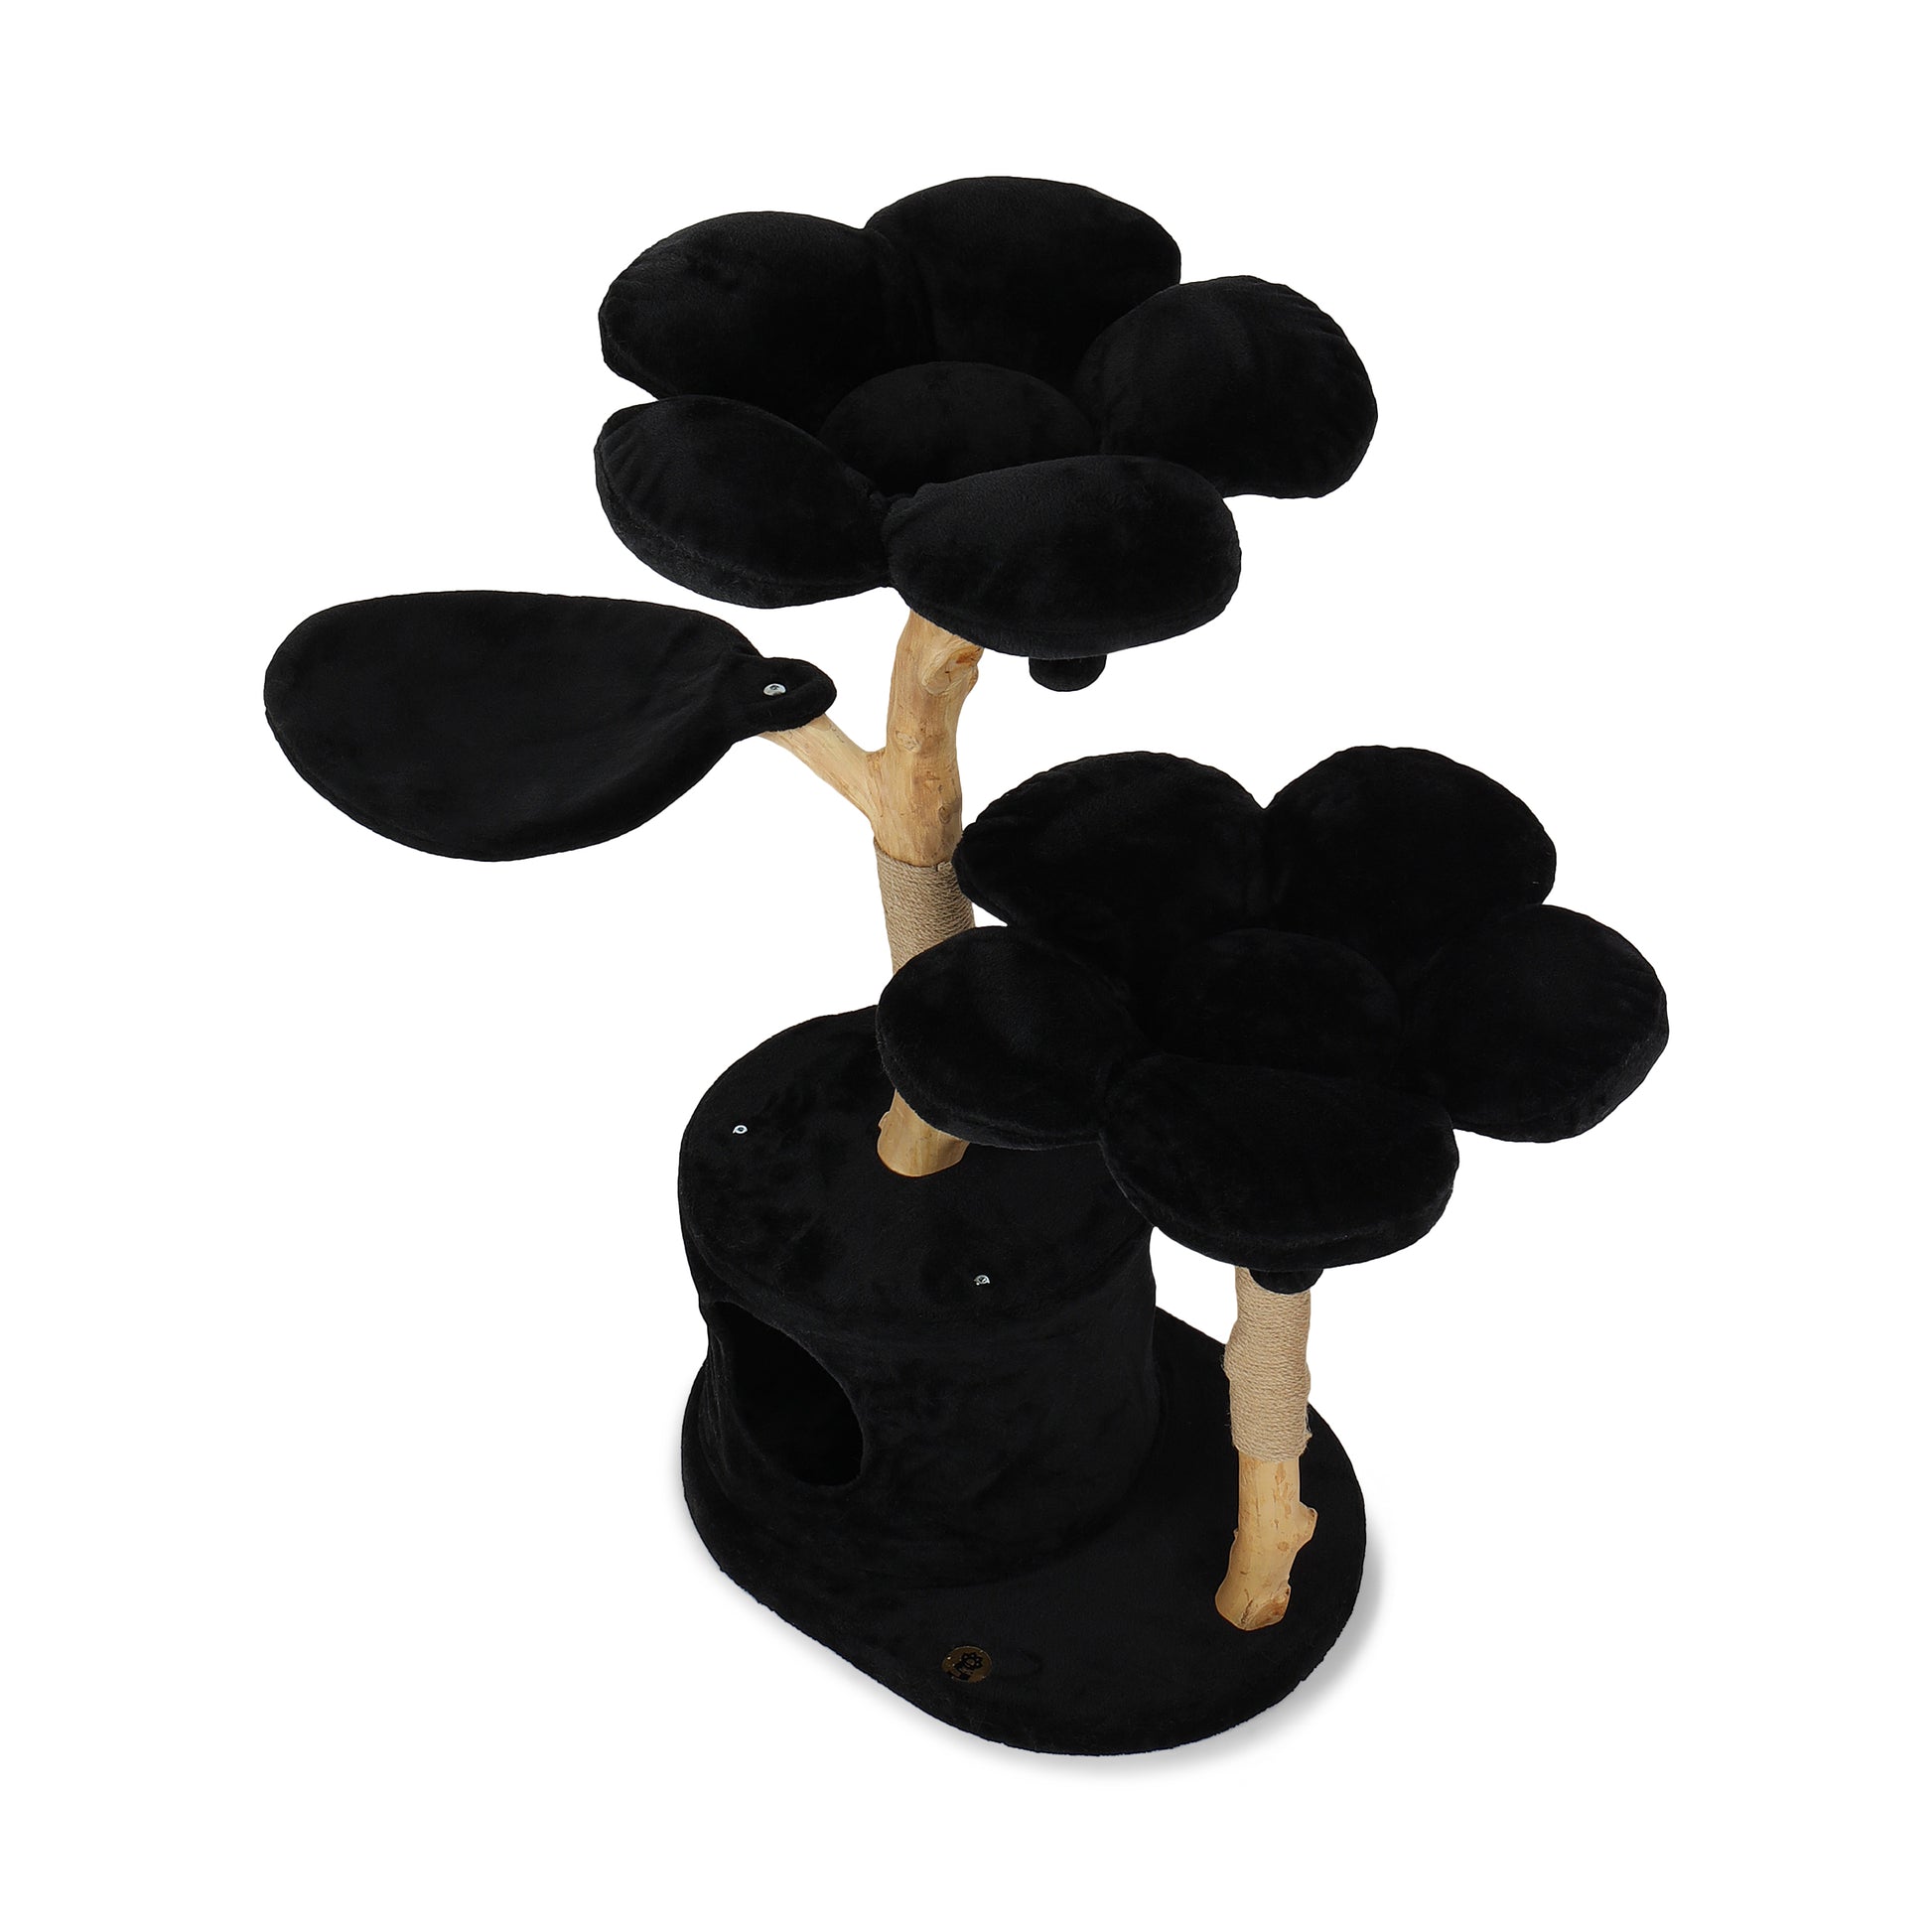 KBS floral cat tree in cozy plush noir with three charming flowers